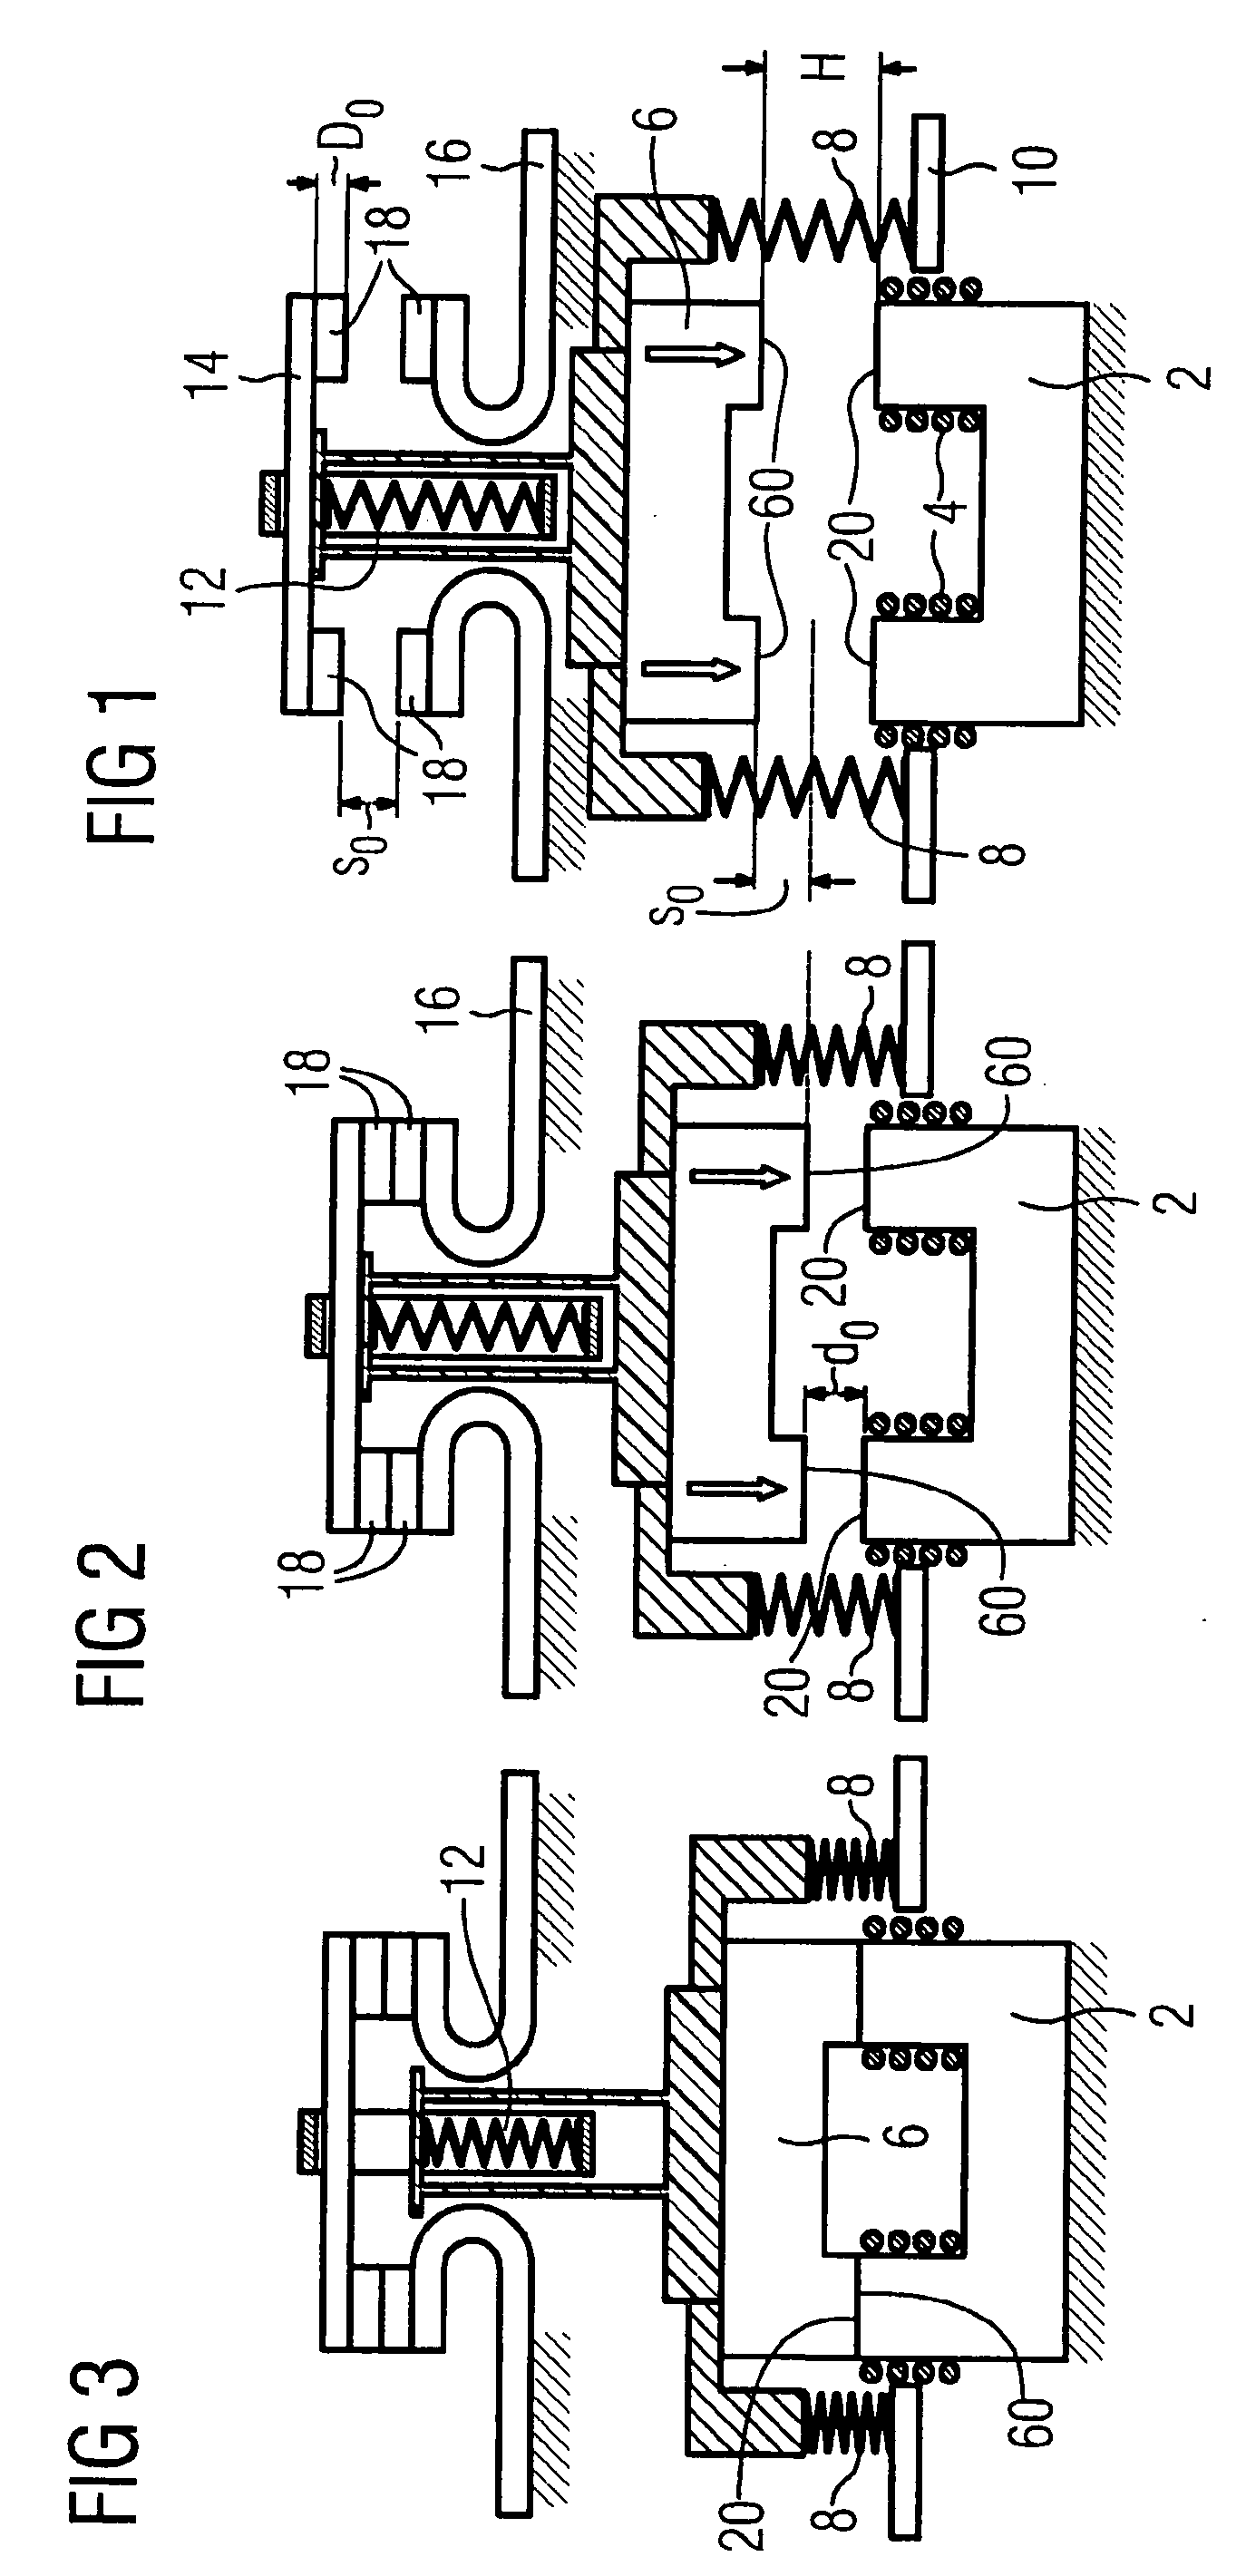 Method for Determining Contact Erosion of an Electromagnetic Switching Device, and Electromagnetic Switching Device Comprising a Mechanism Operating According to Said Method